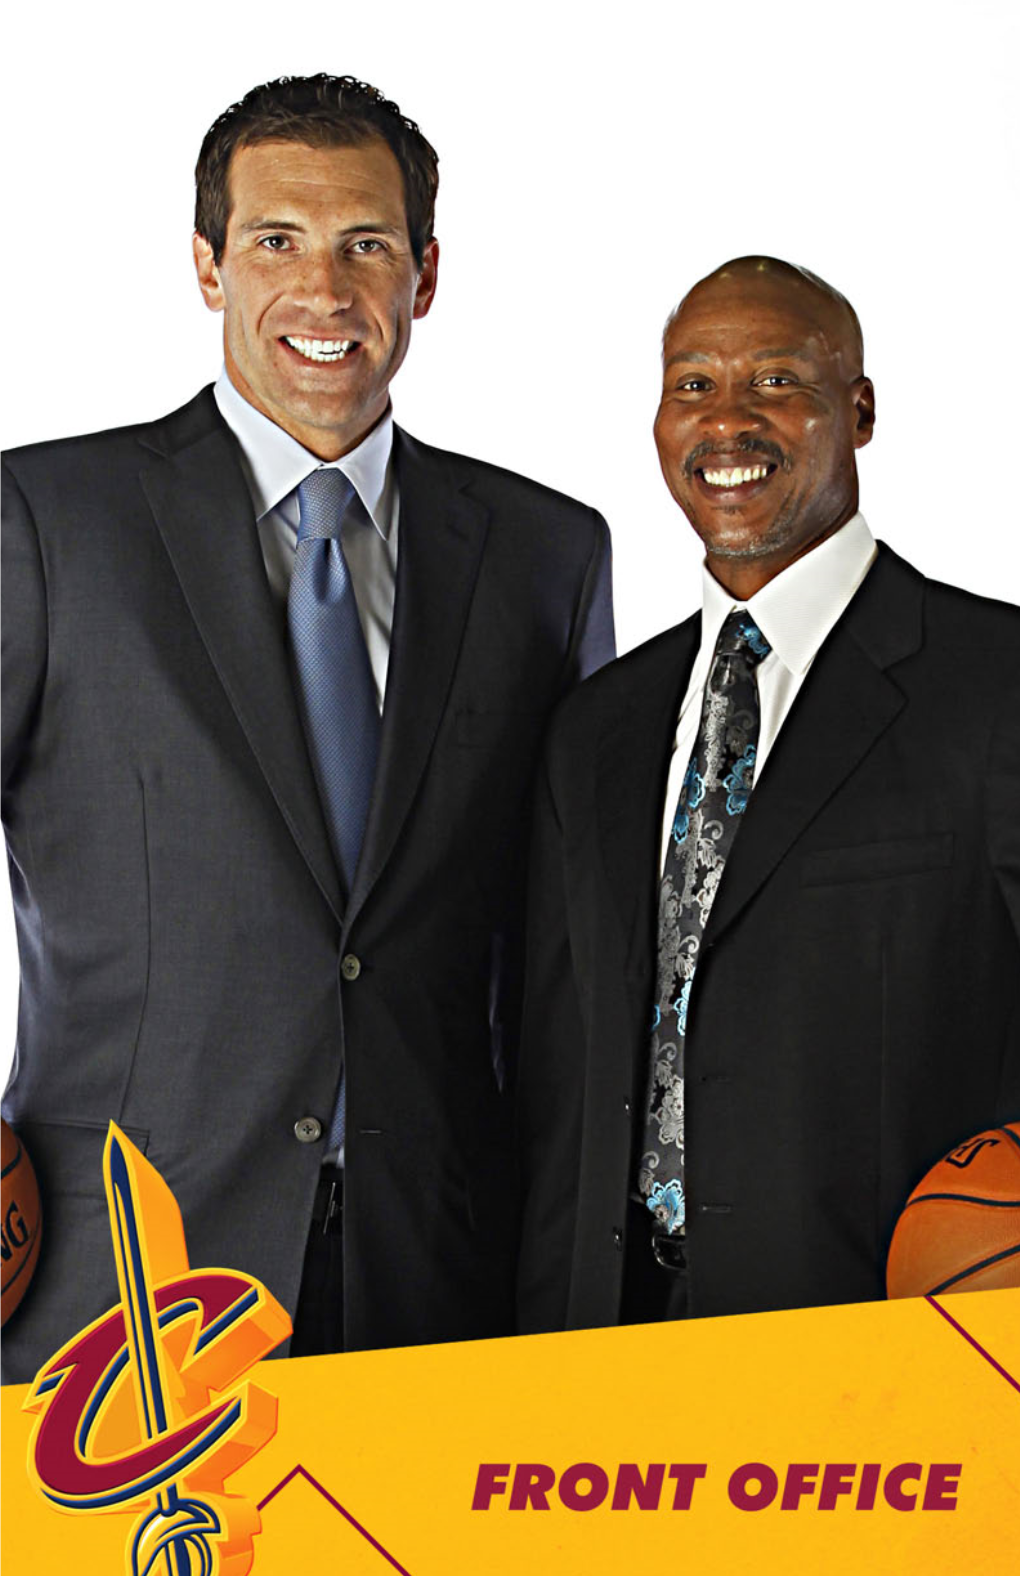 Cleveland Cavaliers 2012-13 Directory Chairman